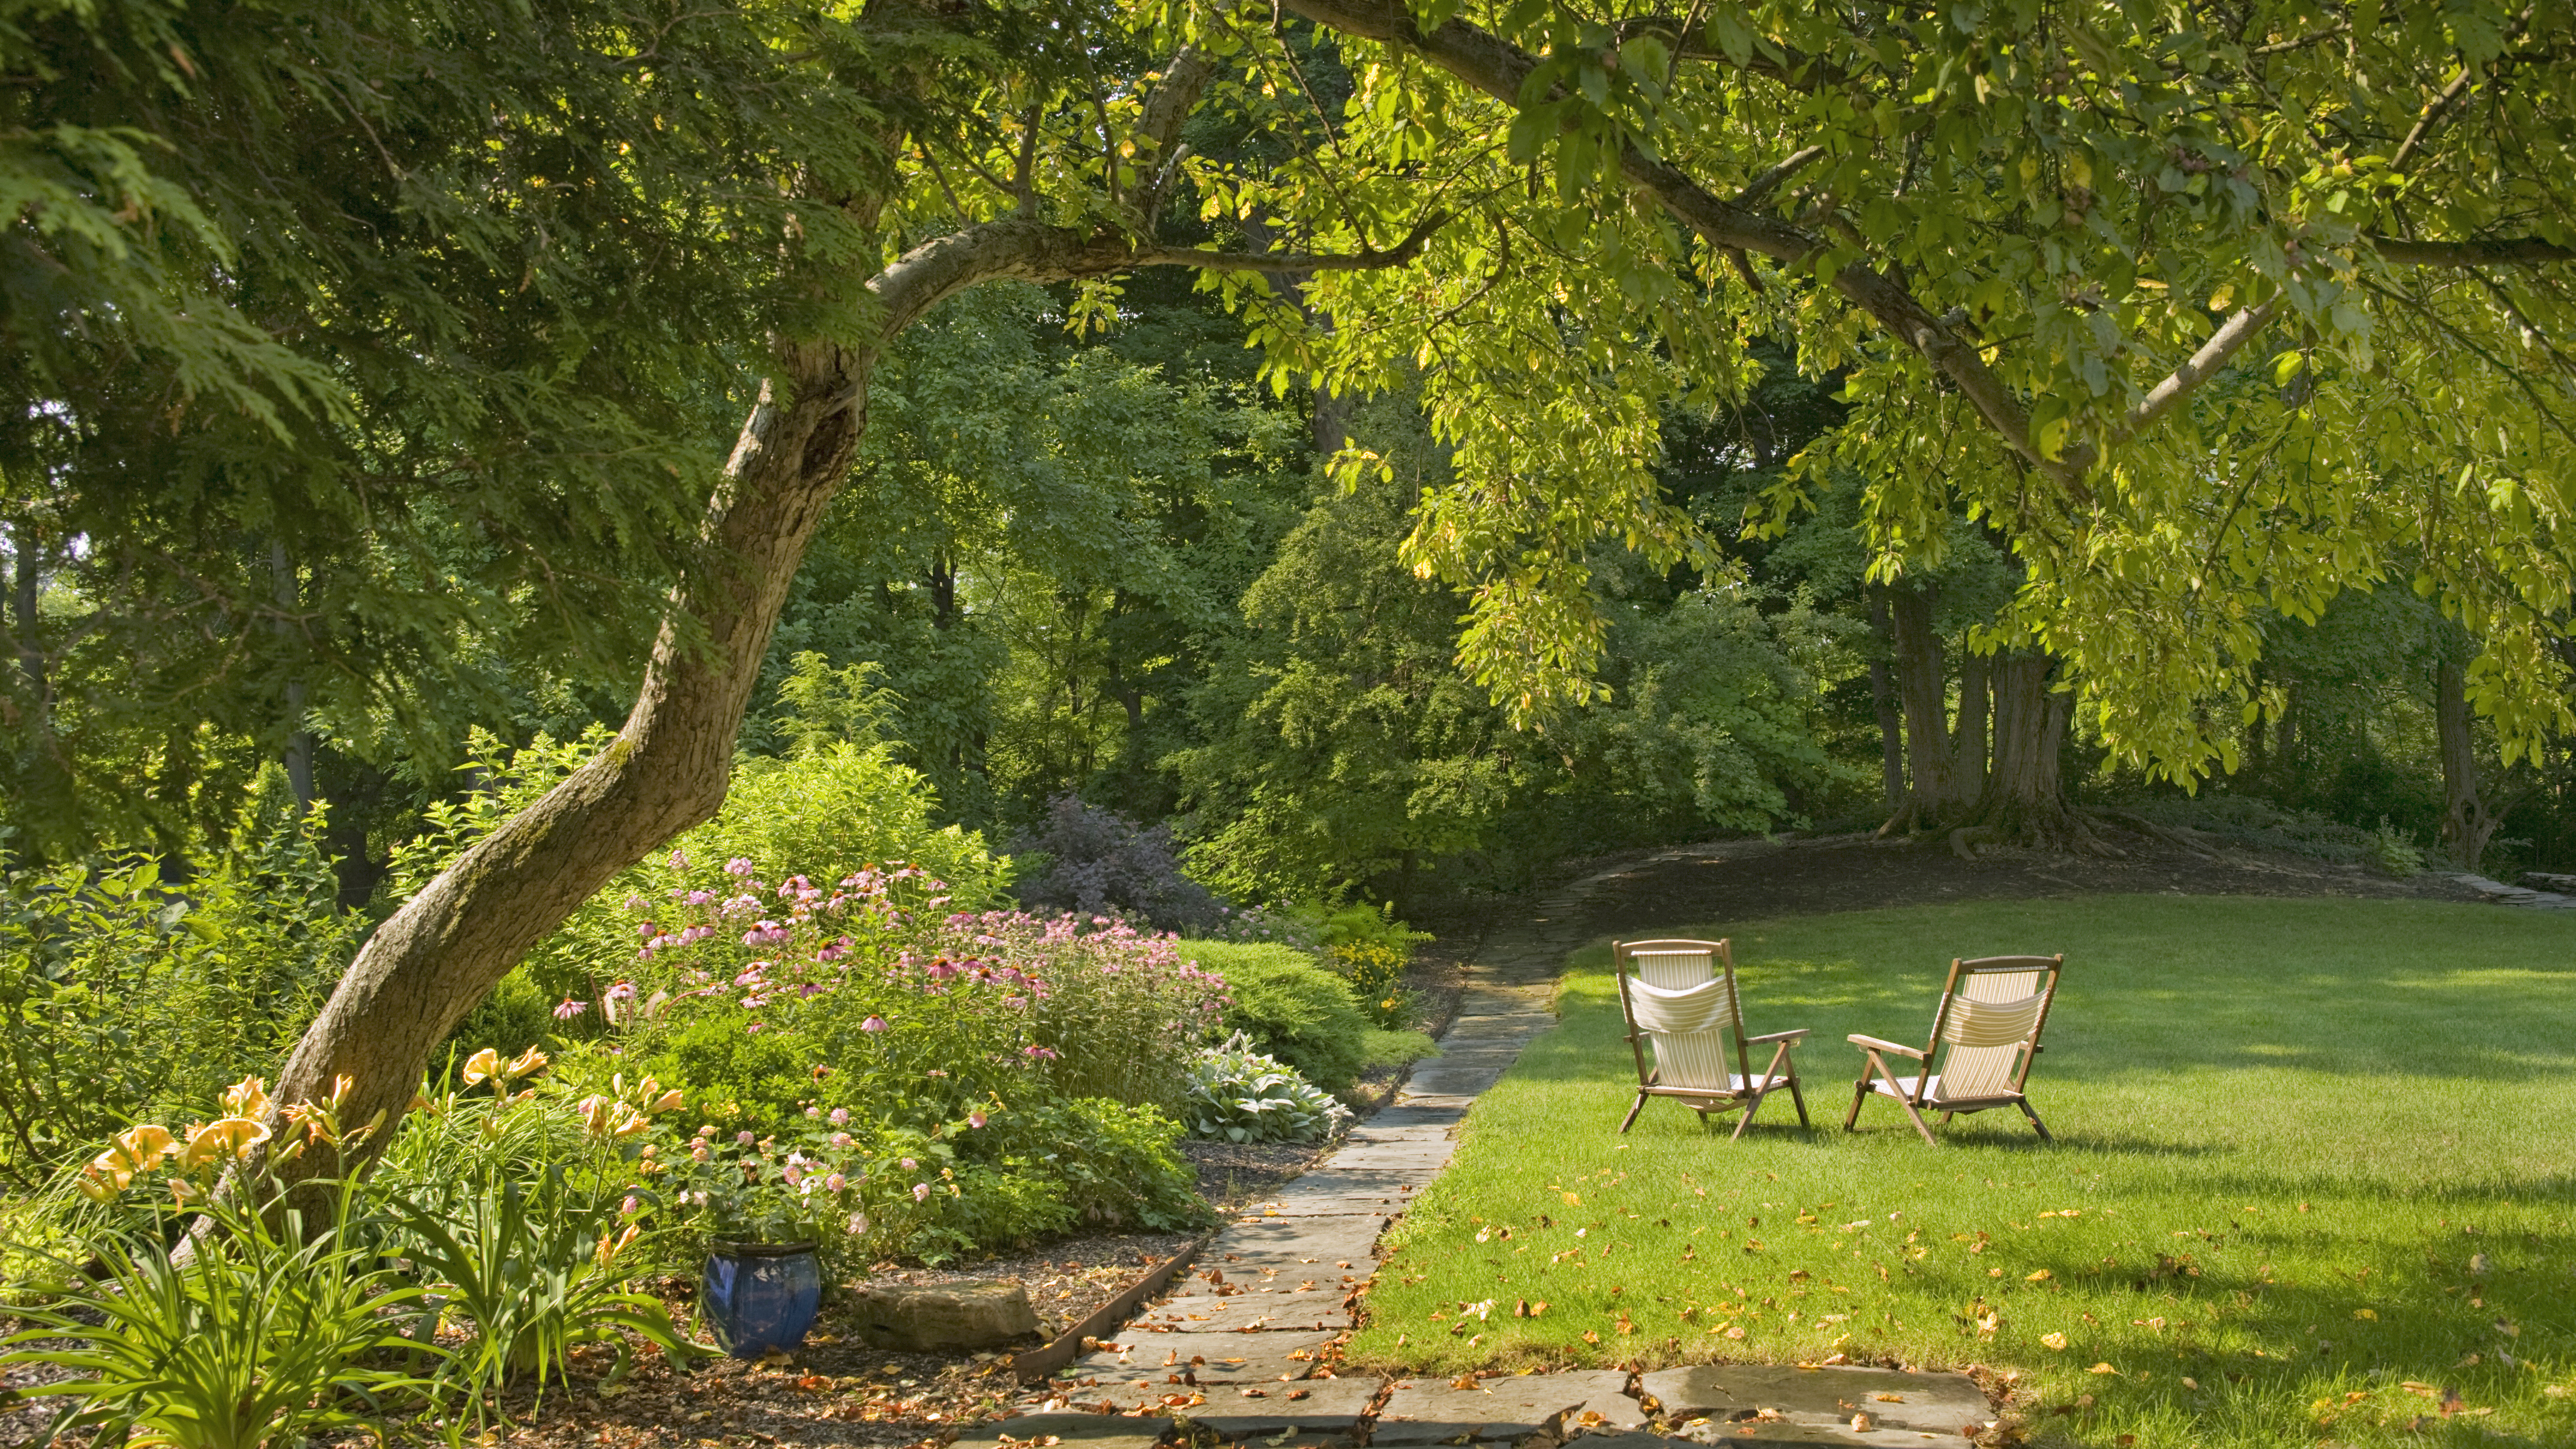 Best trees for privacy – 15 ideas to screen your yard | Homes & Gardens